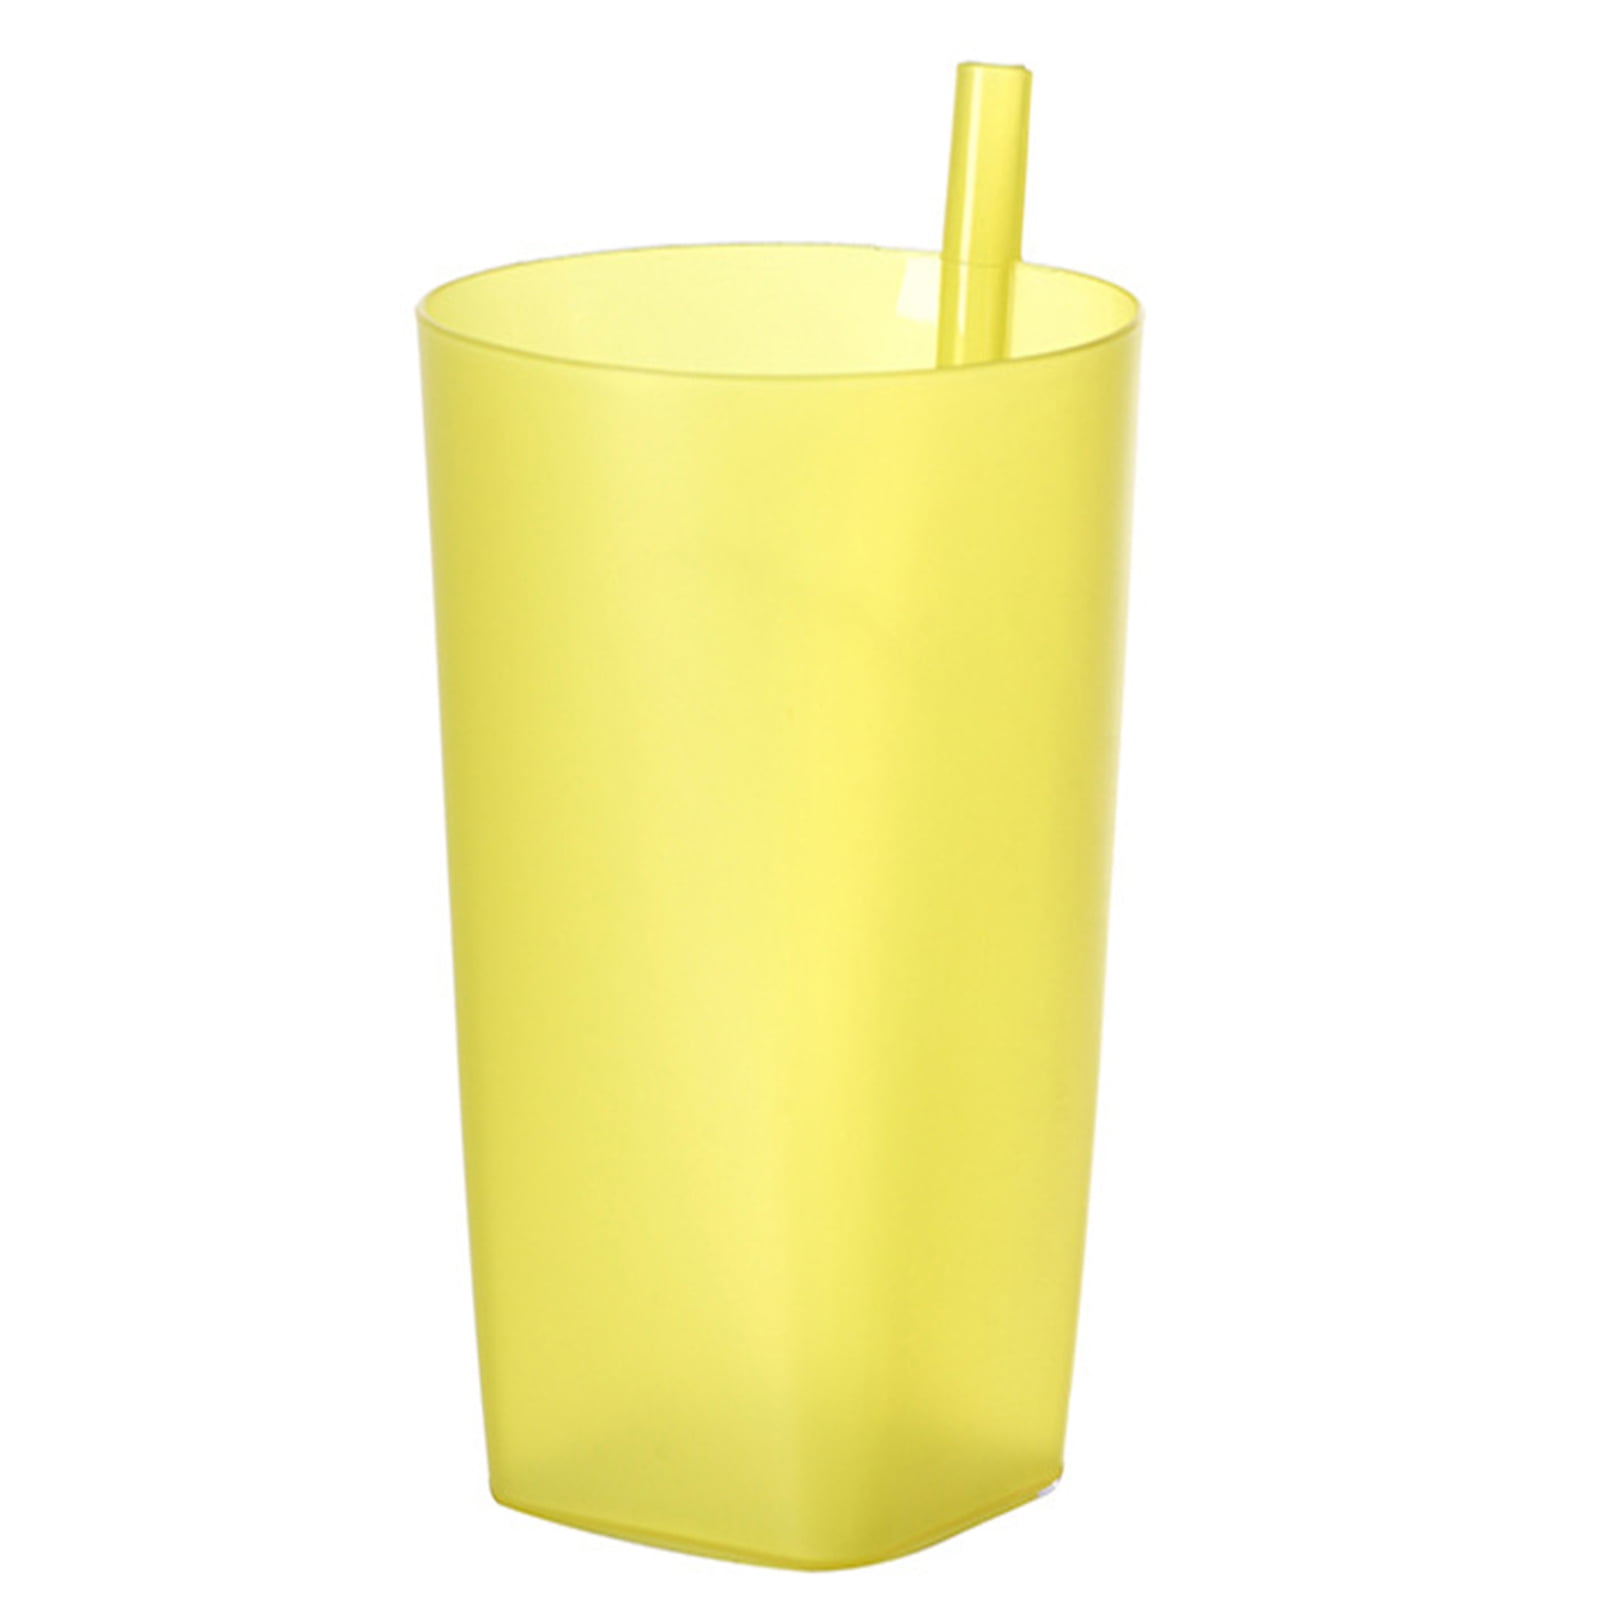 Kids Straw Cups - (Set of 6) 10oz Cups for Kids w/Built In Straws for  Everyday Use, Stackable BPA-Free Plastic Sip-A-Cup Drink Tumblers for  Water